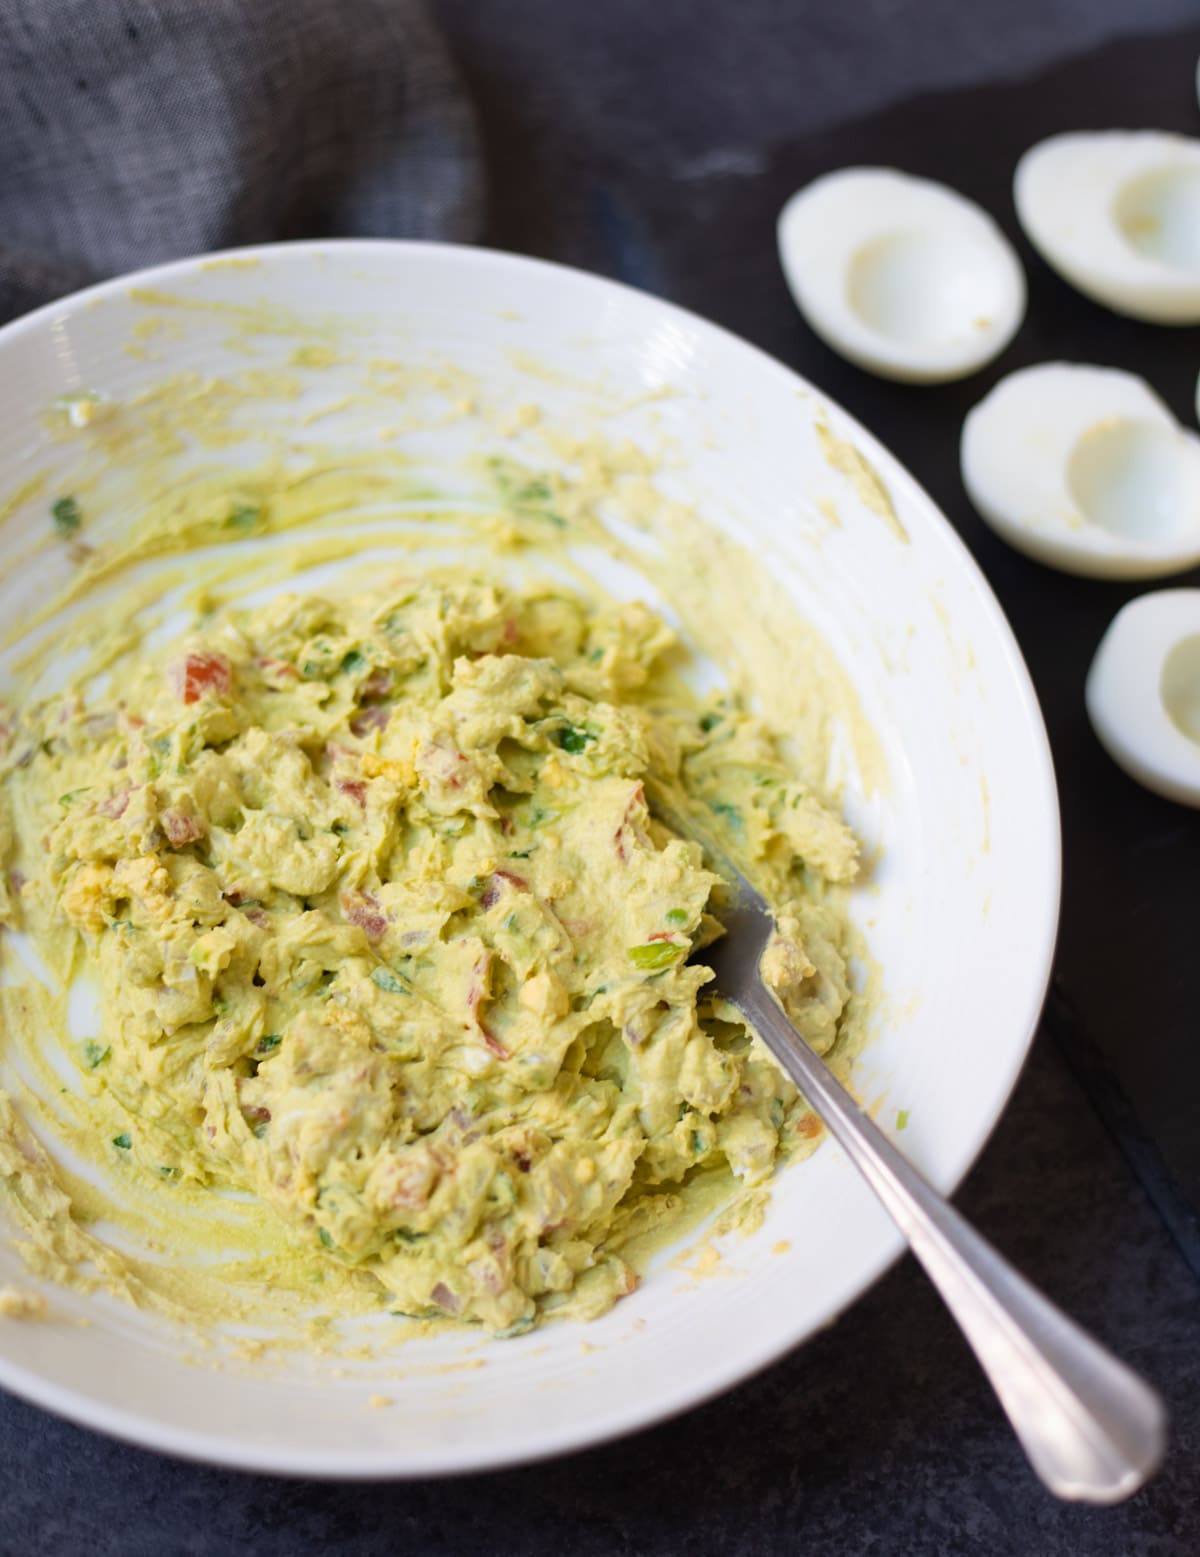 Filling for guacamole deviled eggs in a white bowl